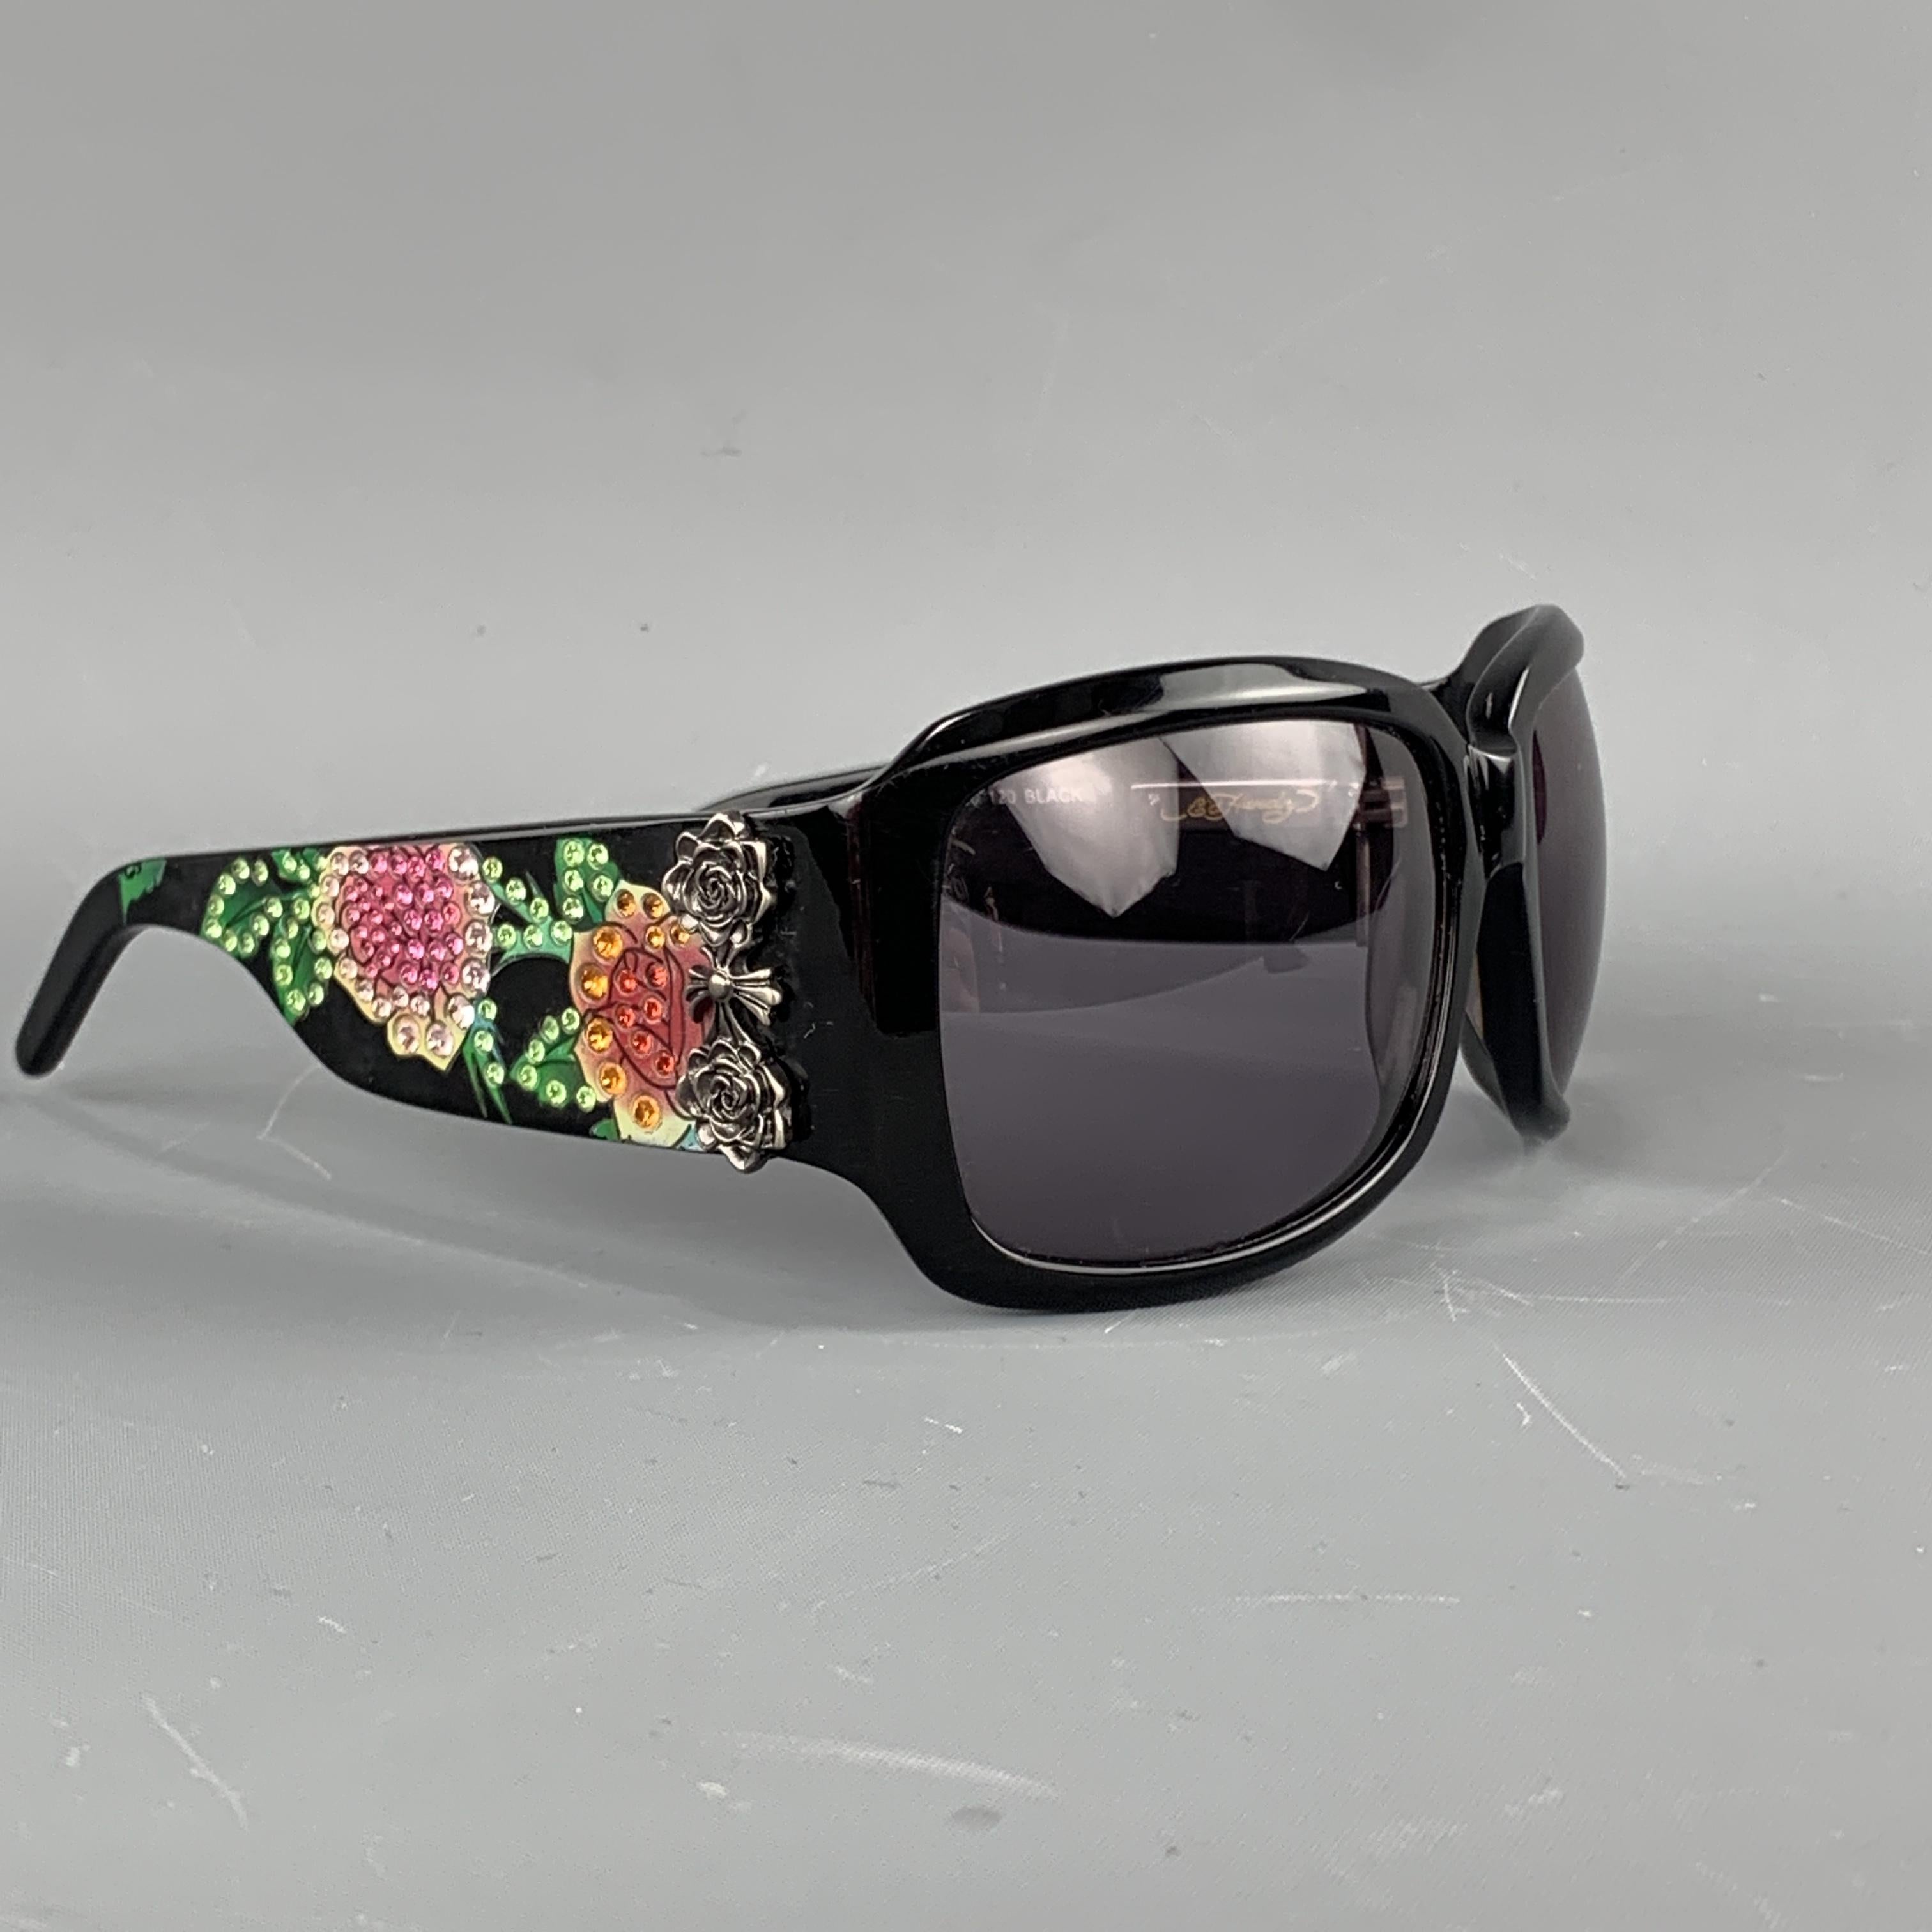 ED HARDY oversized sunglasses come in black acetate with oversized rectangle lenses, dark silver tone metal side adornments, and thick arms with skull and rose graphics studded with Swarovski crystals. Minor wear.

Very good Pre-Owned